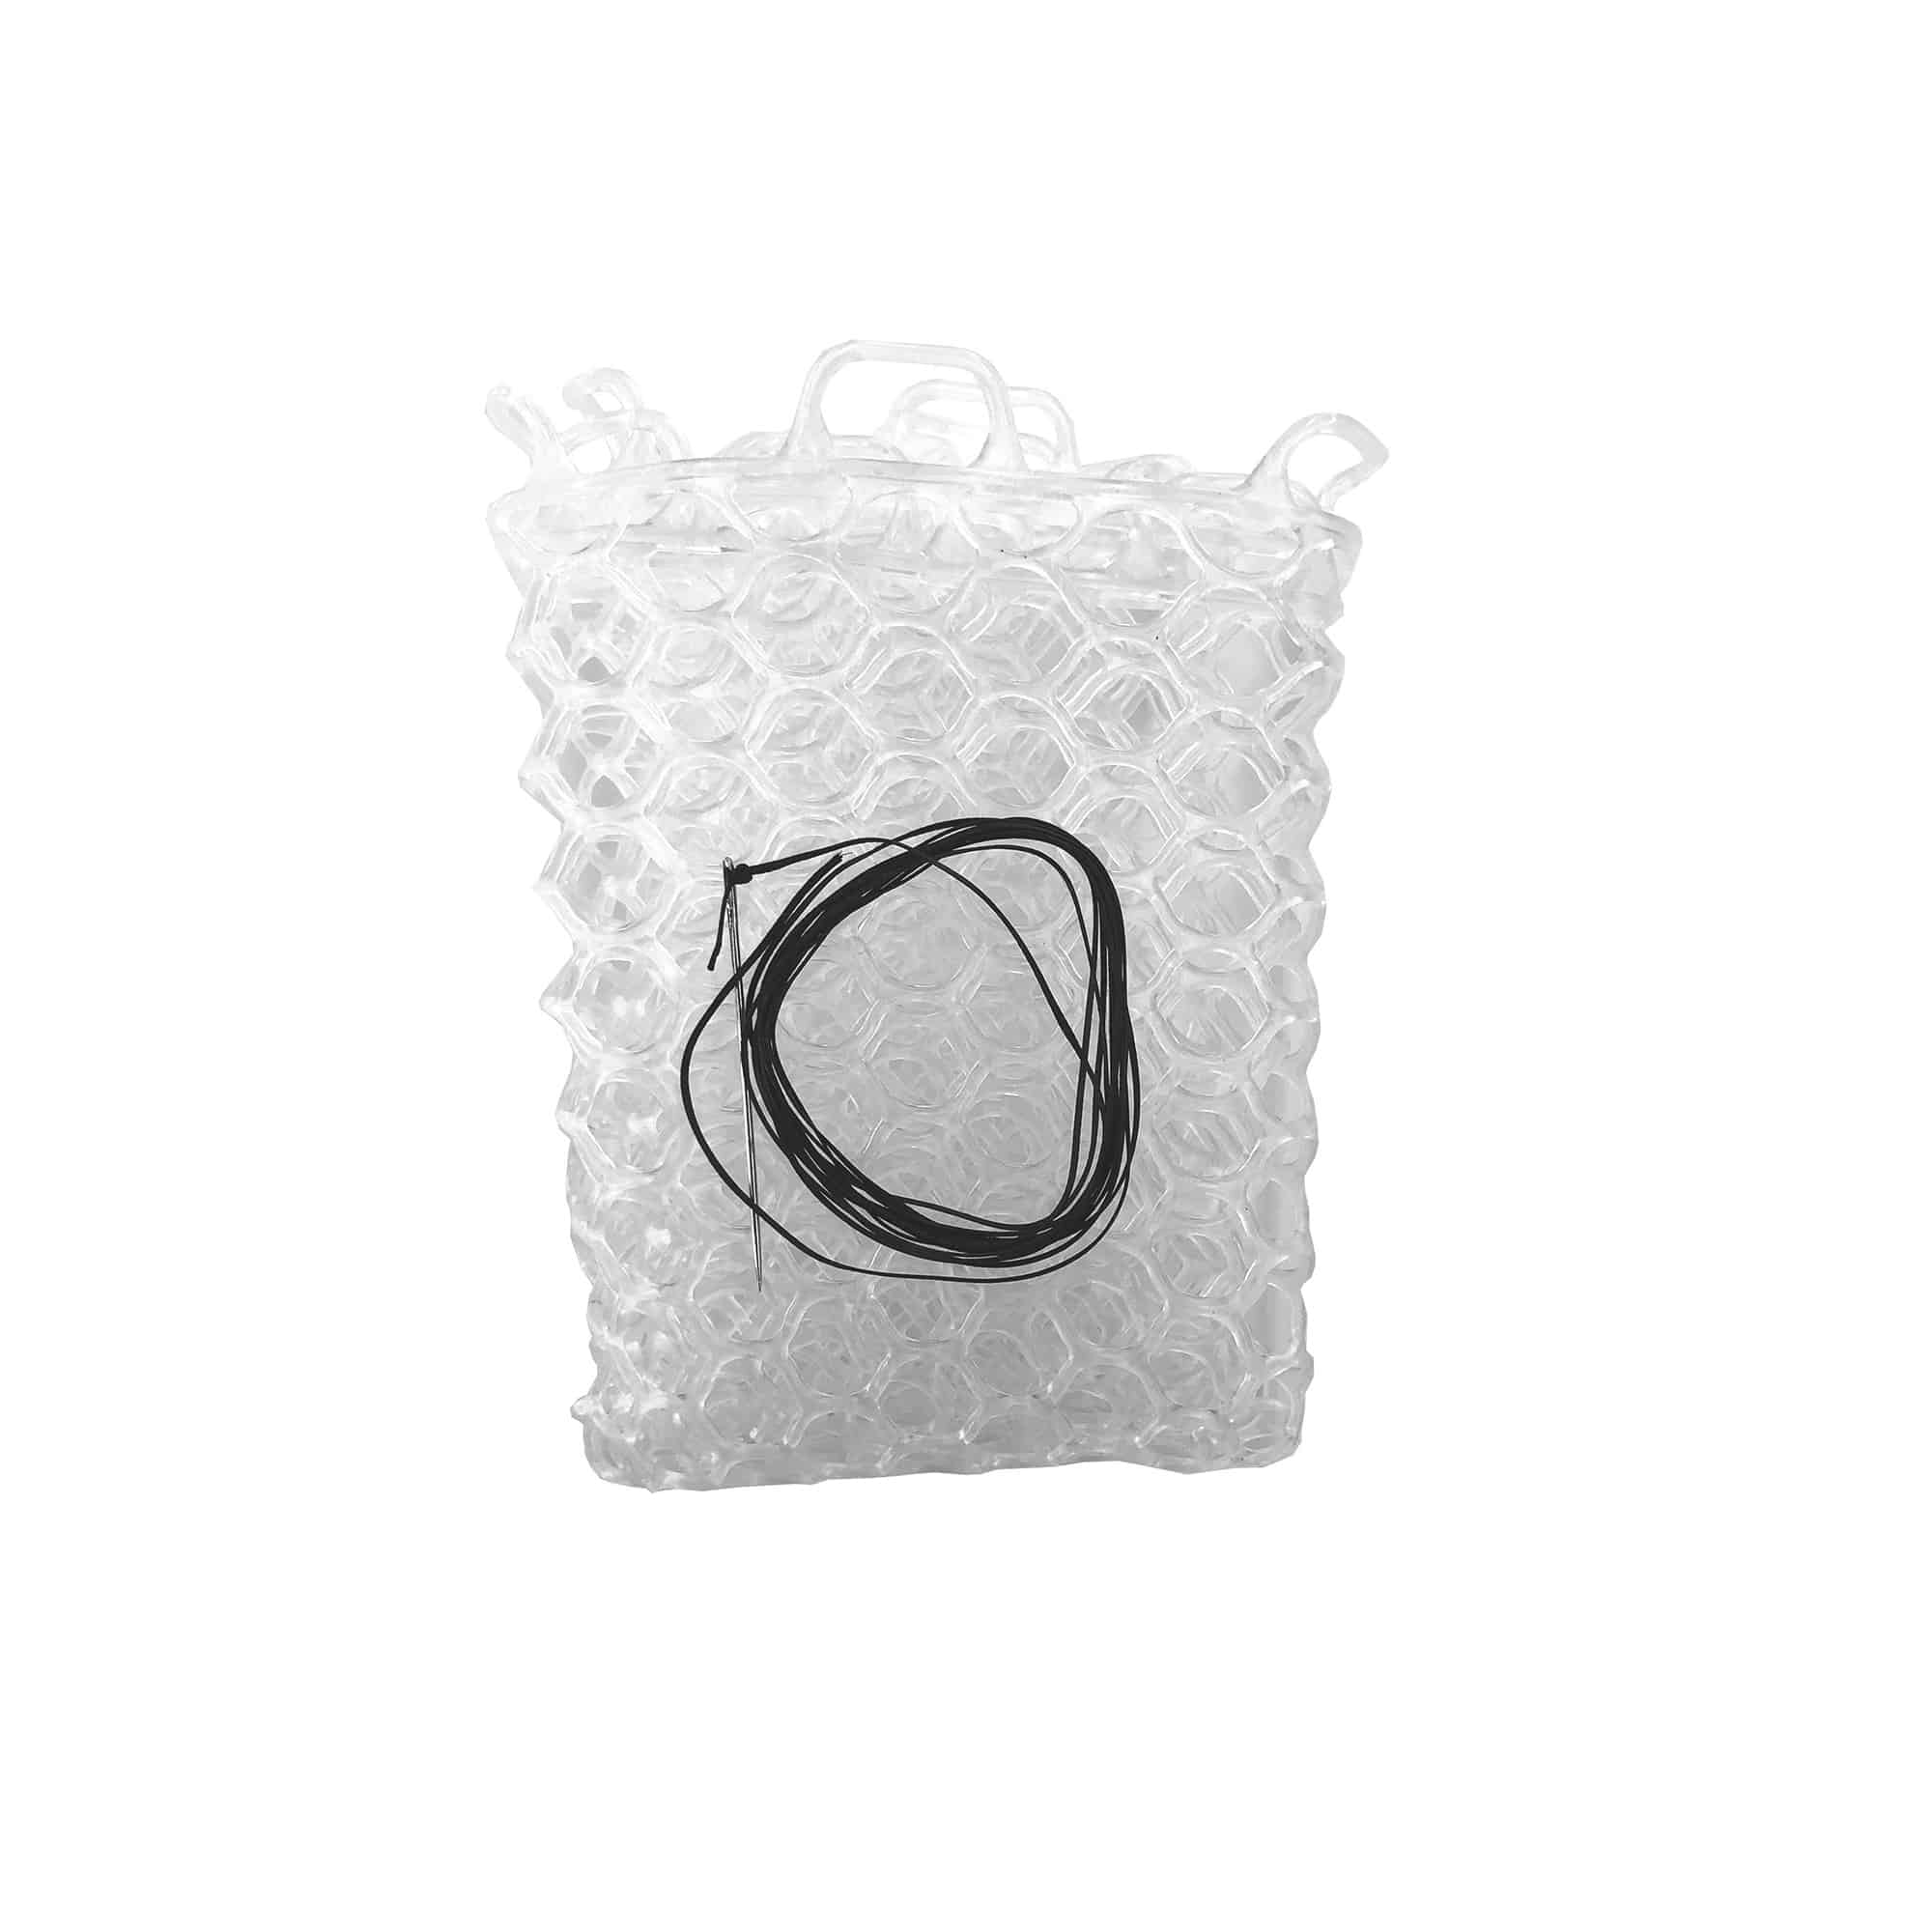 Fishpond Nomad Native Net Replacement Rubber Net 12.5" Clear